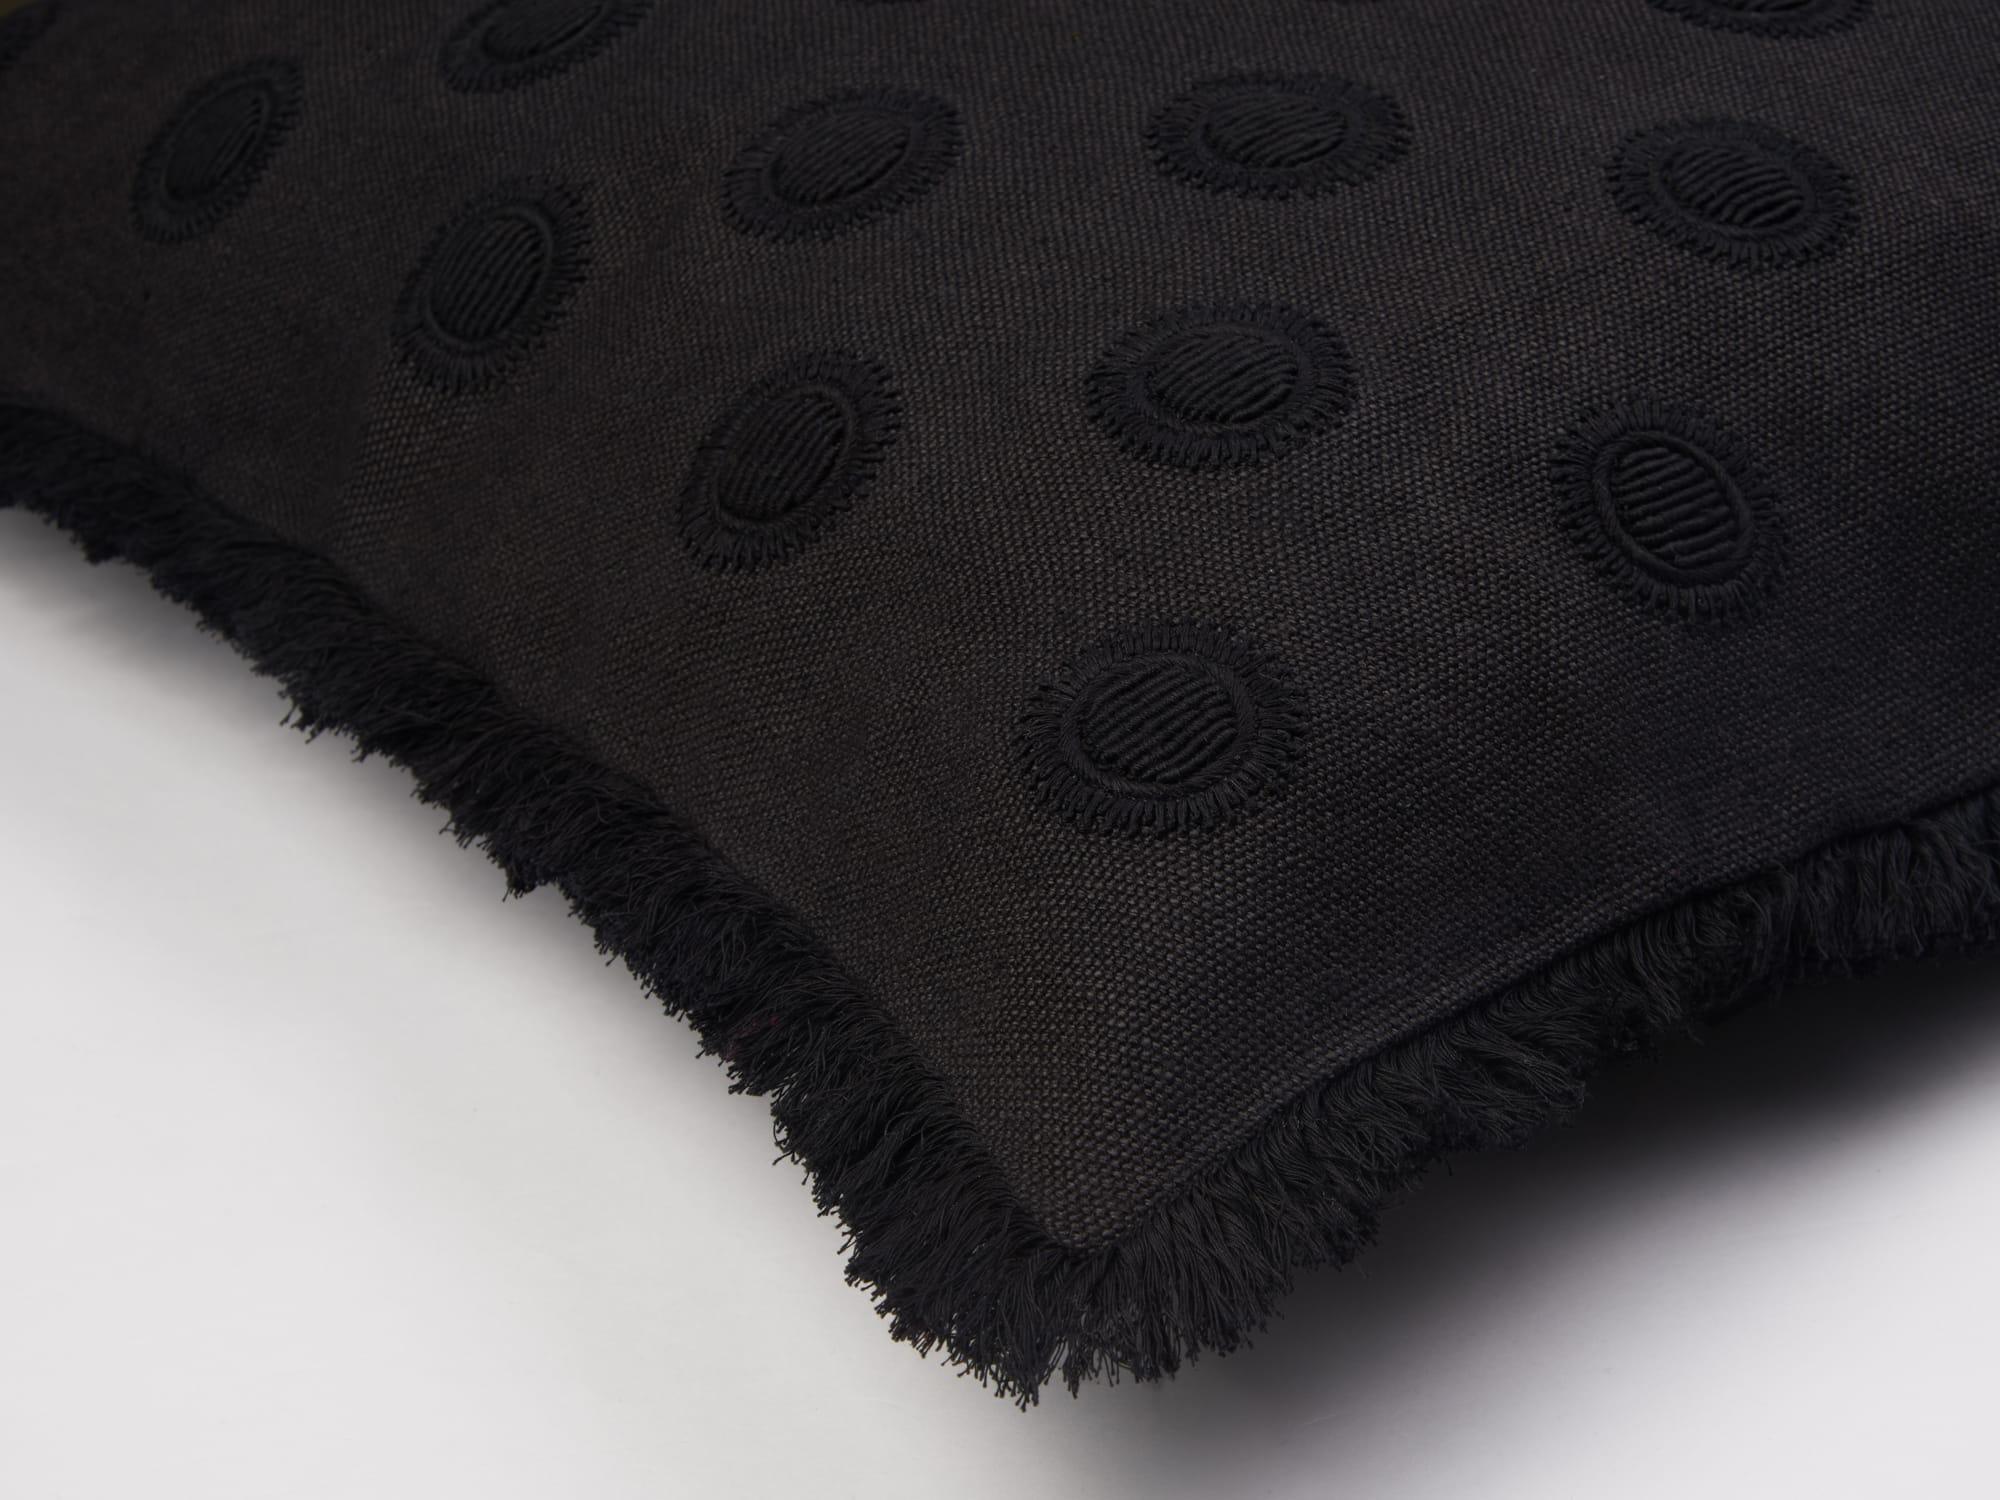 Black tone on tone cushion cover entirely embroidered by hand on high quality cotton. 
Cover only, duck feather fillers can be ordered seperately
Standard size 65 x 65 cm. Customisable in other sizes, color combinations or fabrics on request.